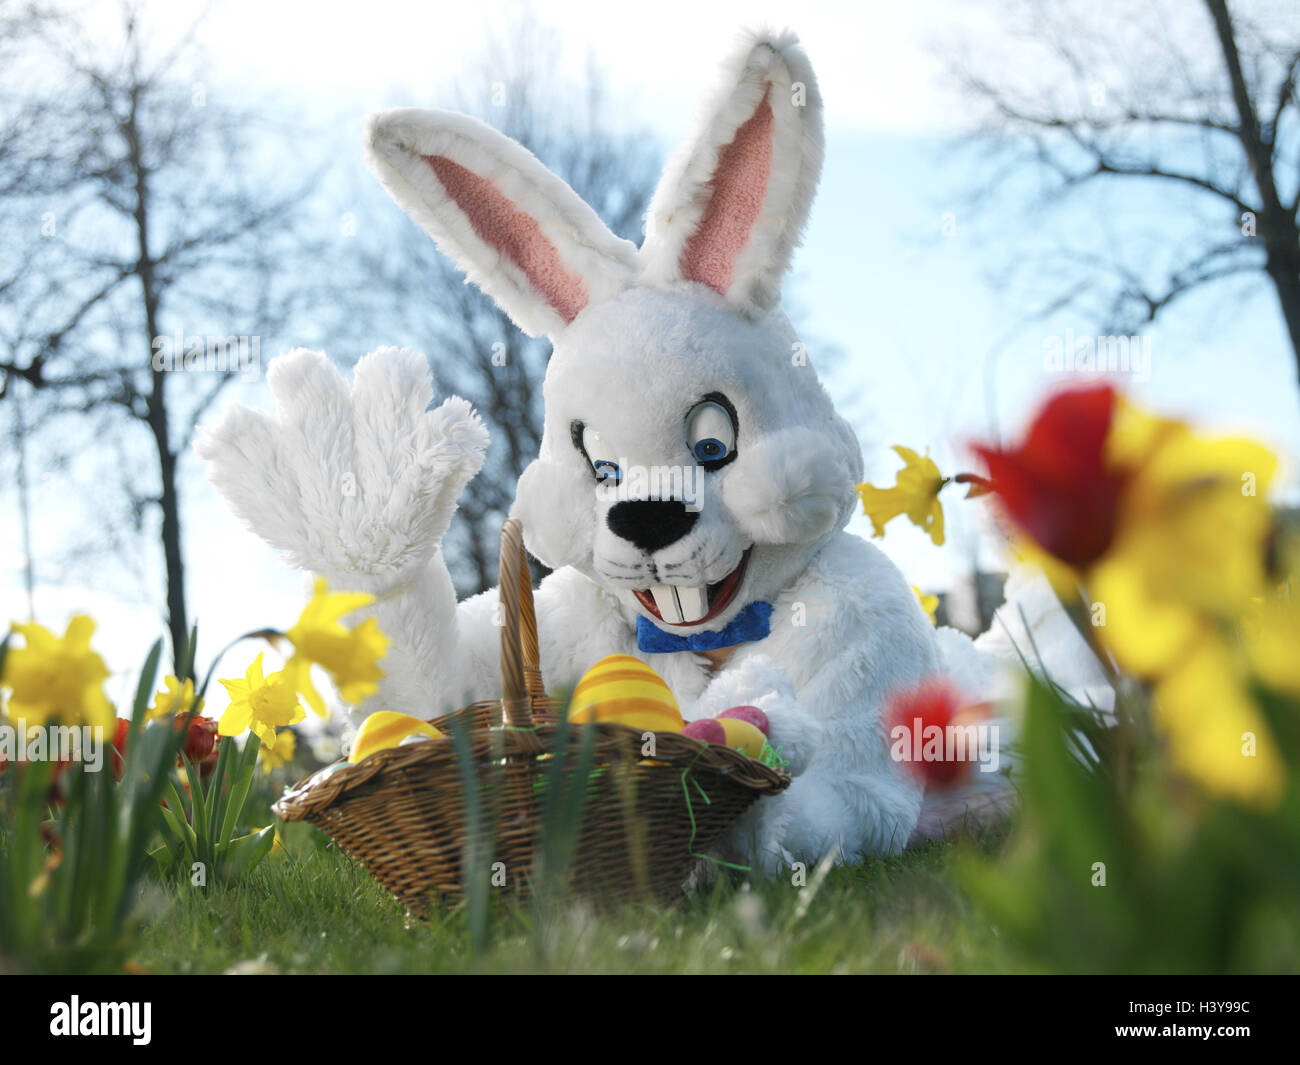 Meadow, Easter bunny, wave, Easter basket, portrait, flower meadow, flowers, narcissi, daffodils, Easter, Easter feast, child faith, lining, panels, costume, hare's costume, hare, humor, fun, funnily, friendly, happily, joy, Easter nest, Easter eggs, hide, search, find, season, Spring, springtime, outside Stock Photo